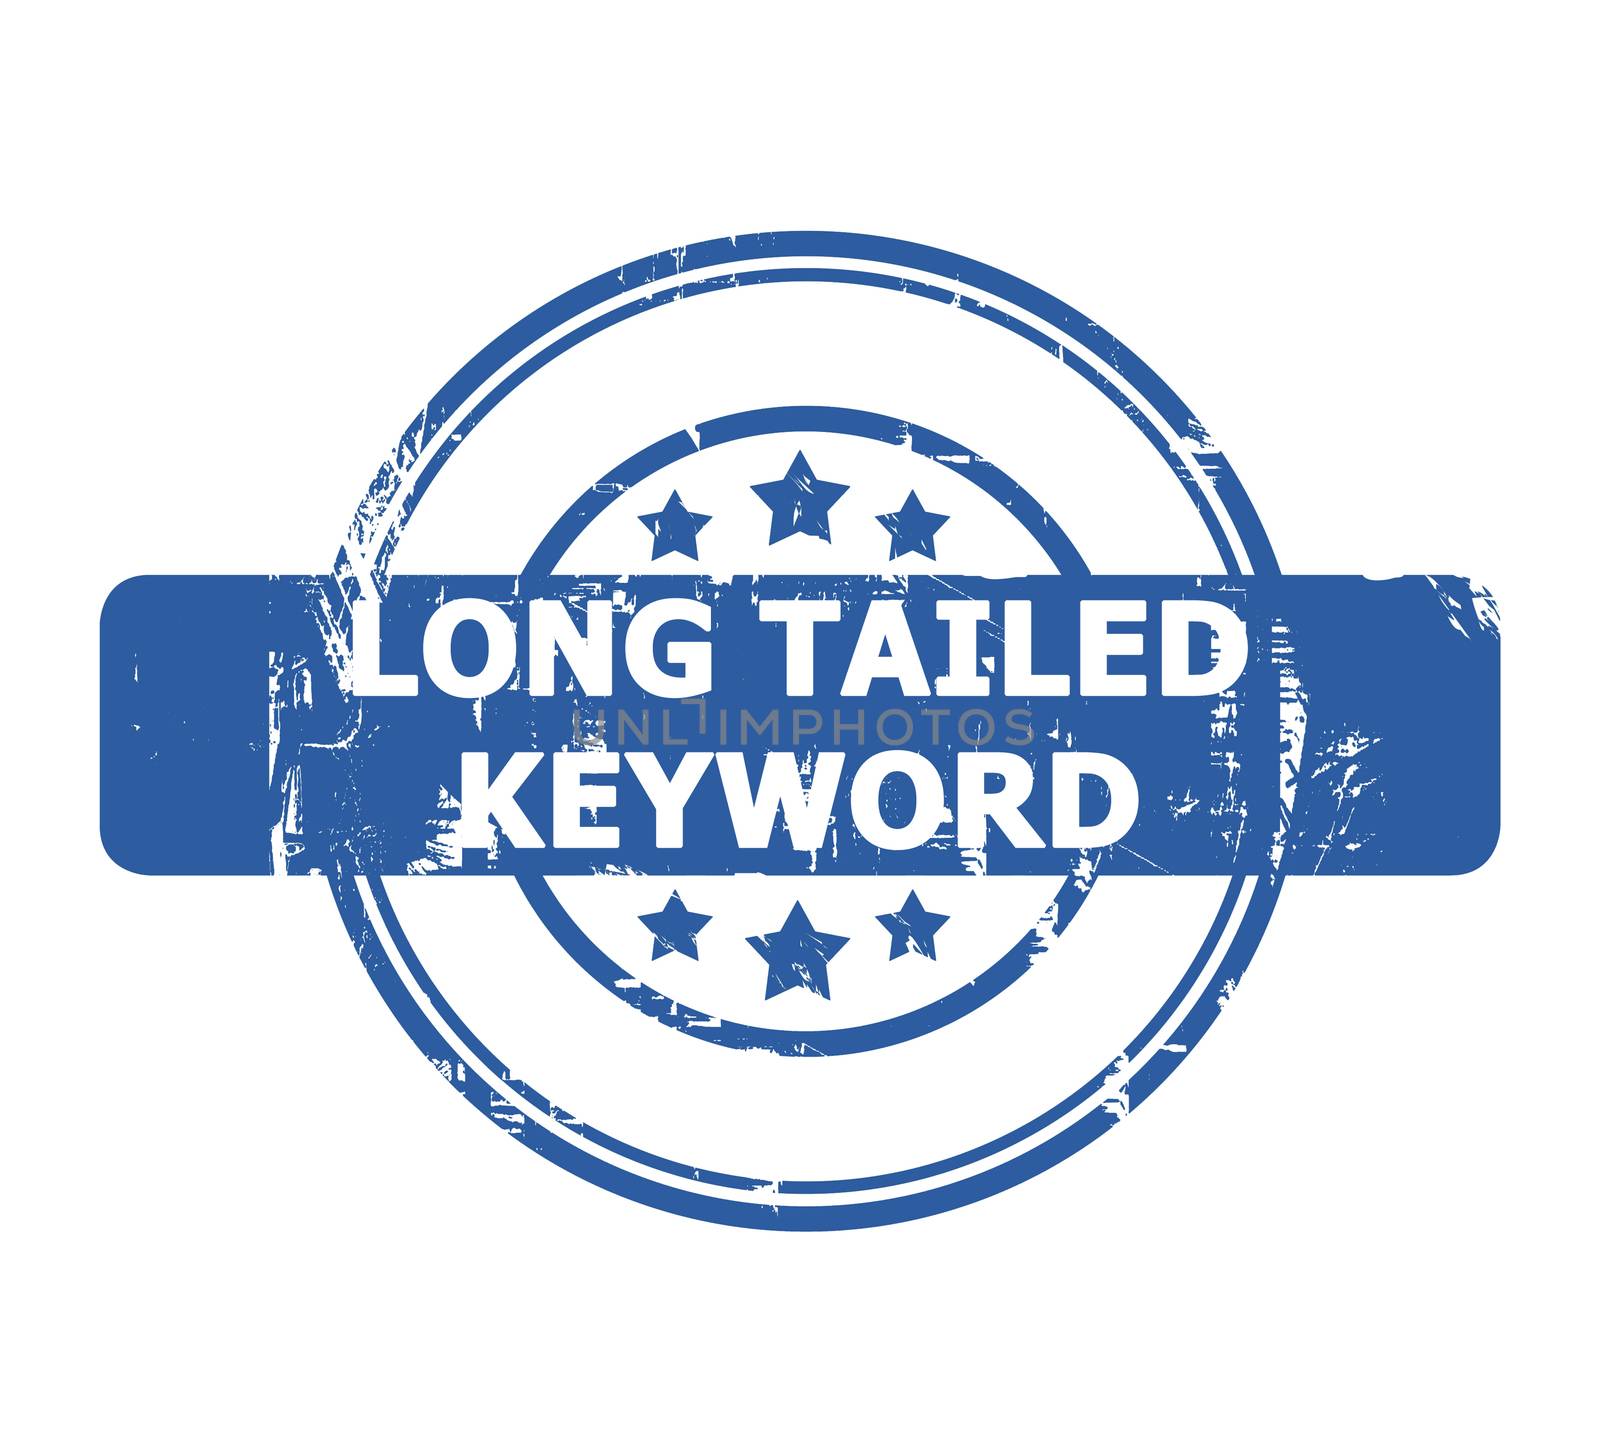 Long Tailed Keyword Stamp by speedfighter